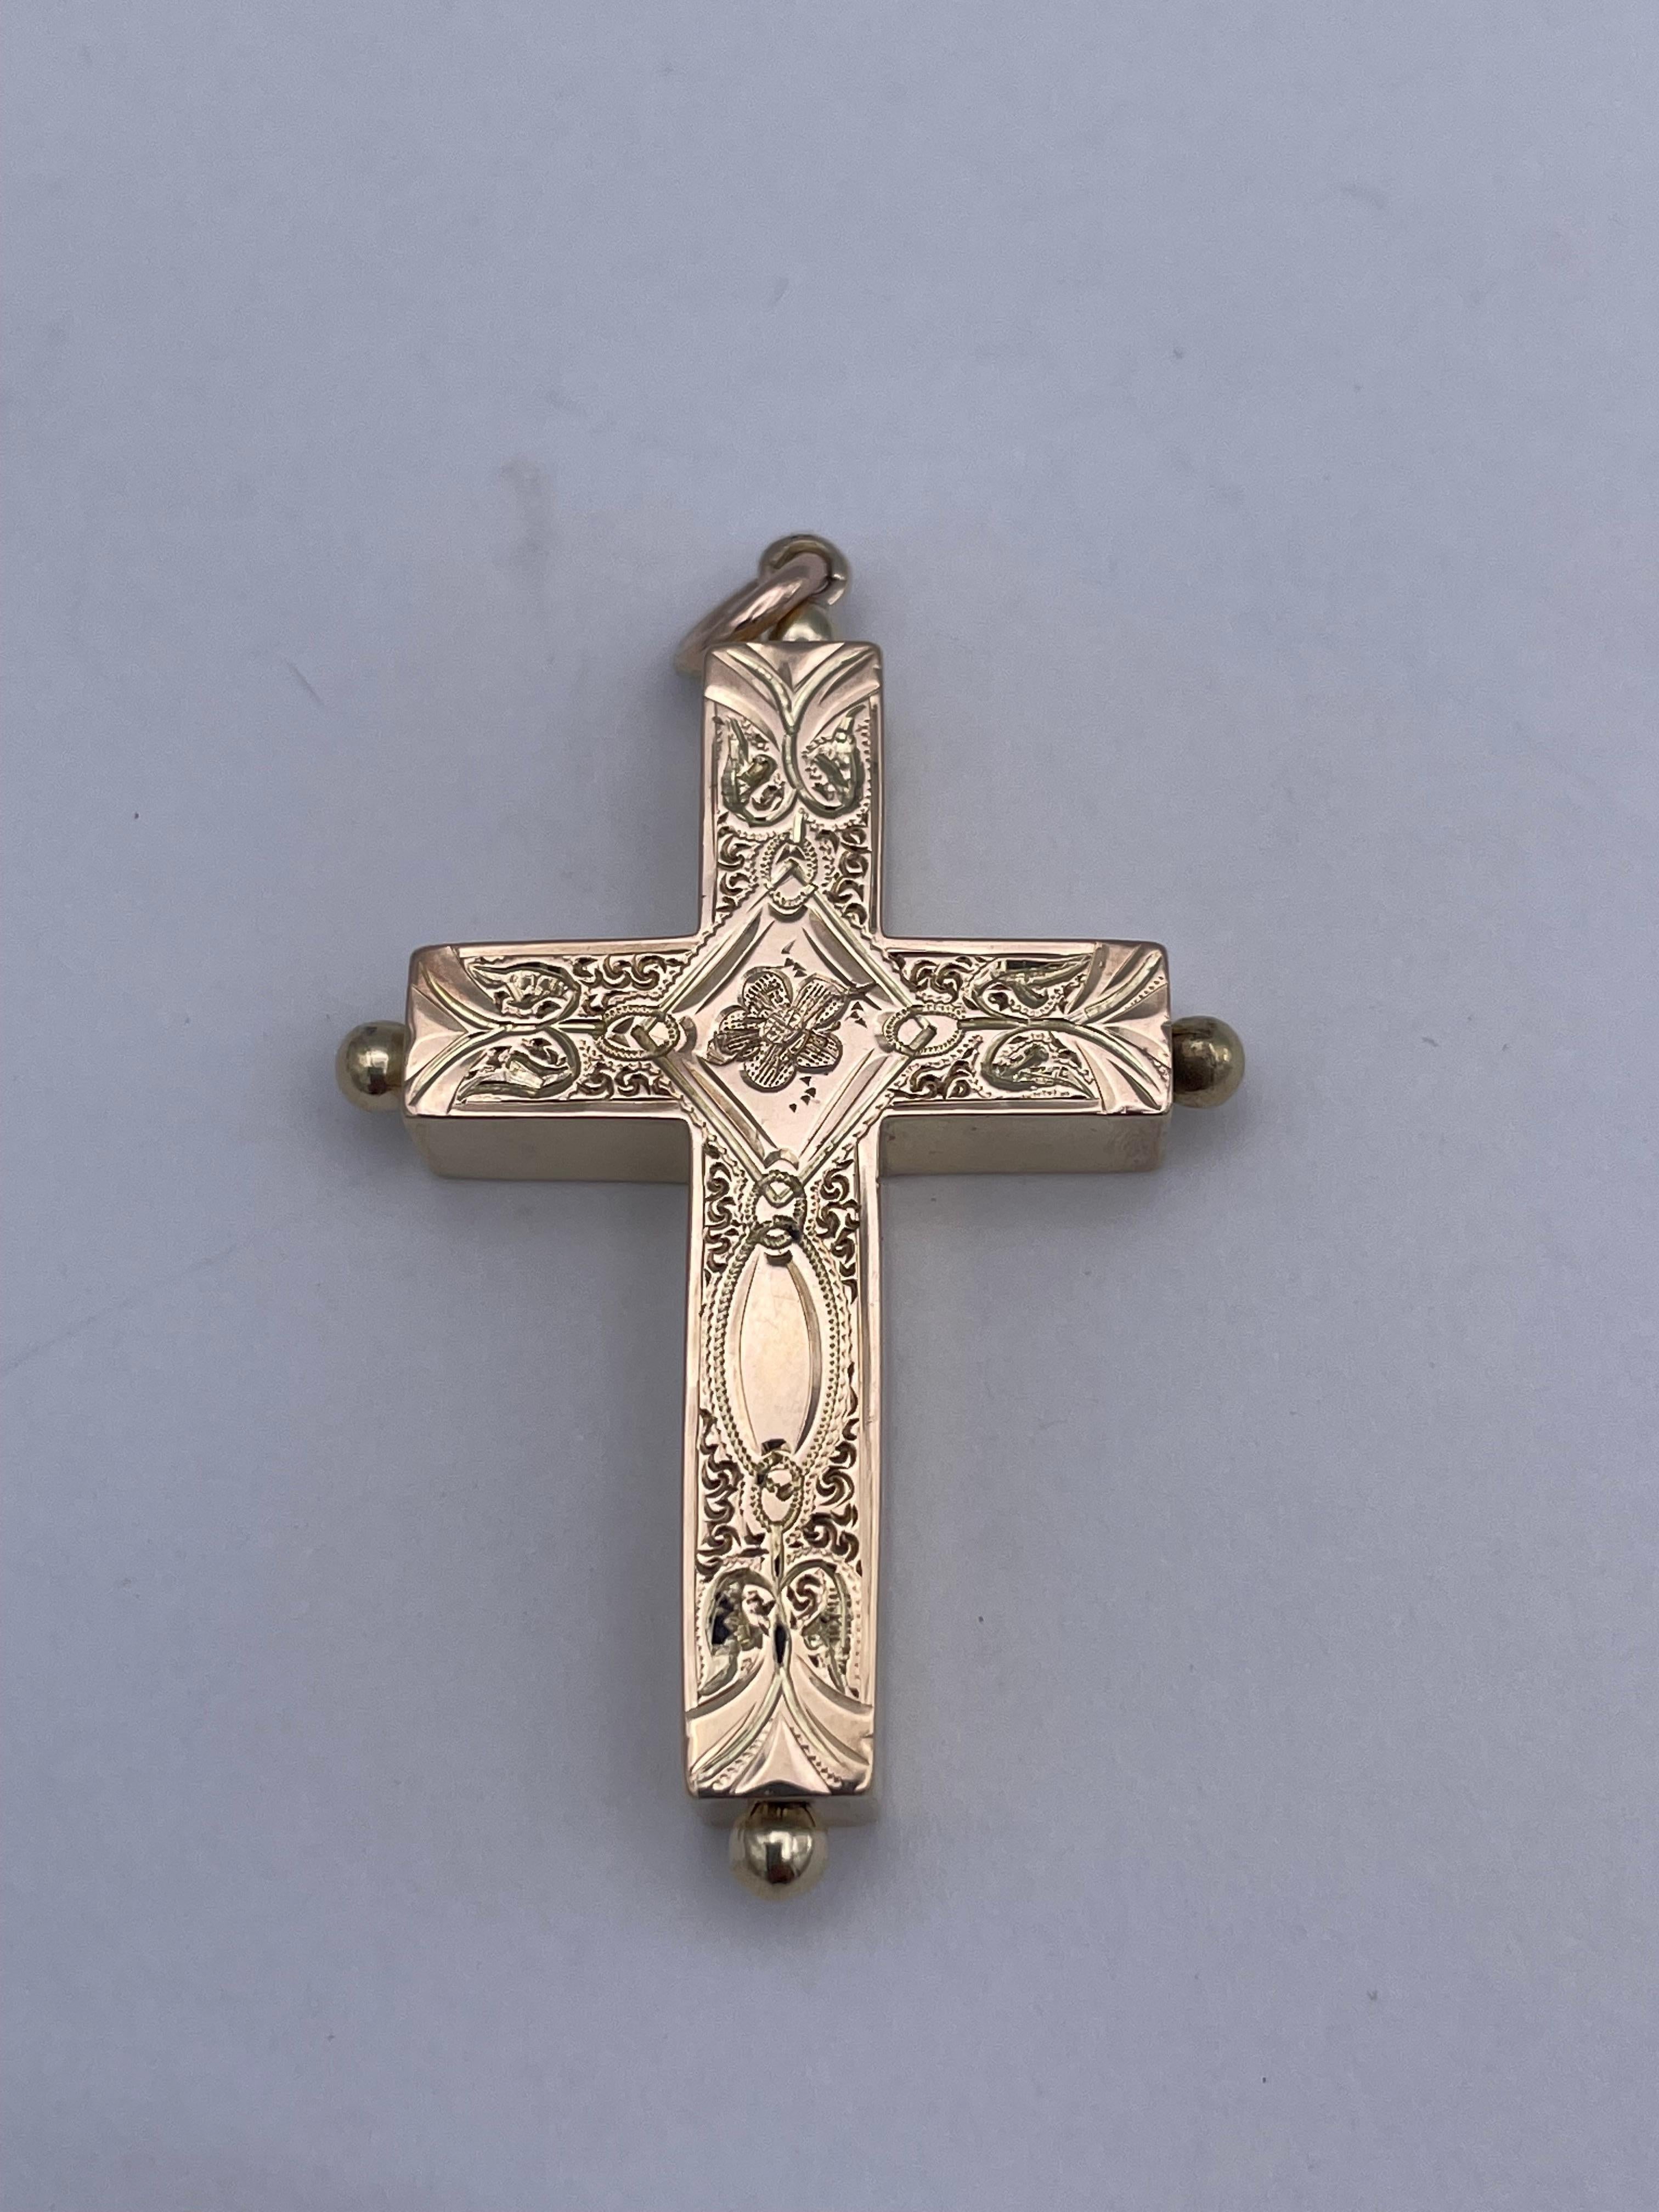 Absolutely beautiful antique cross.  Allover fine floral and leaf engraving on front.  Gold spheres mark 